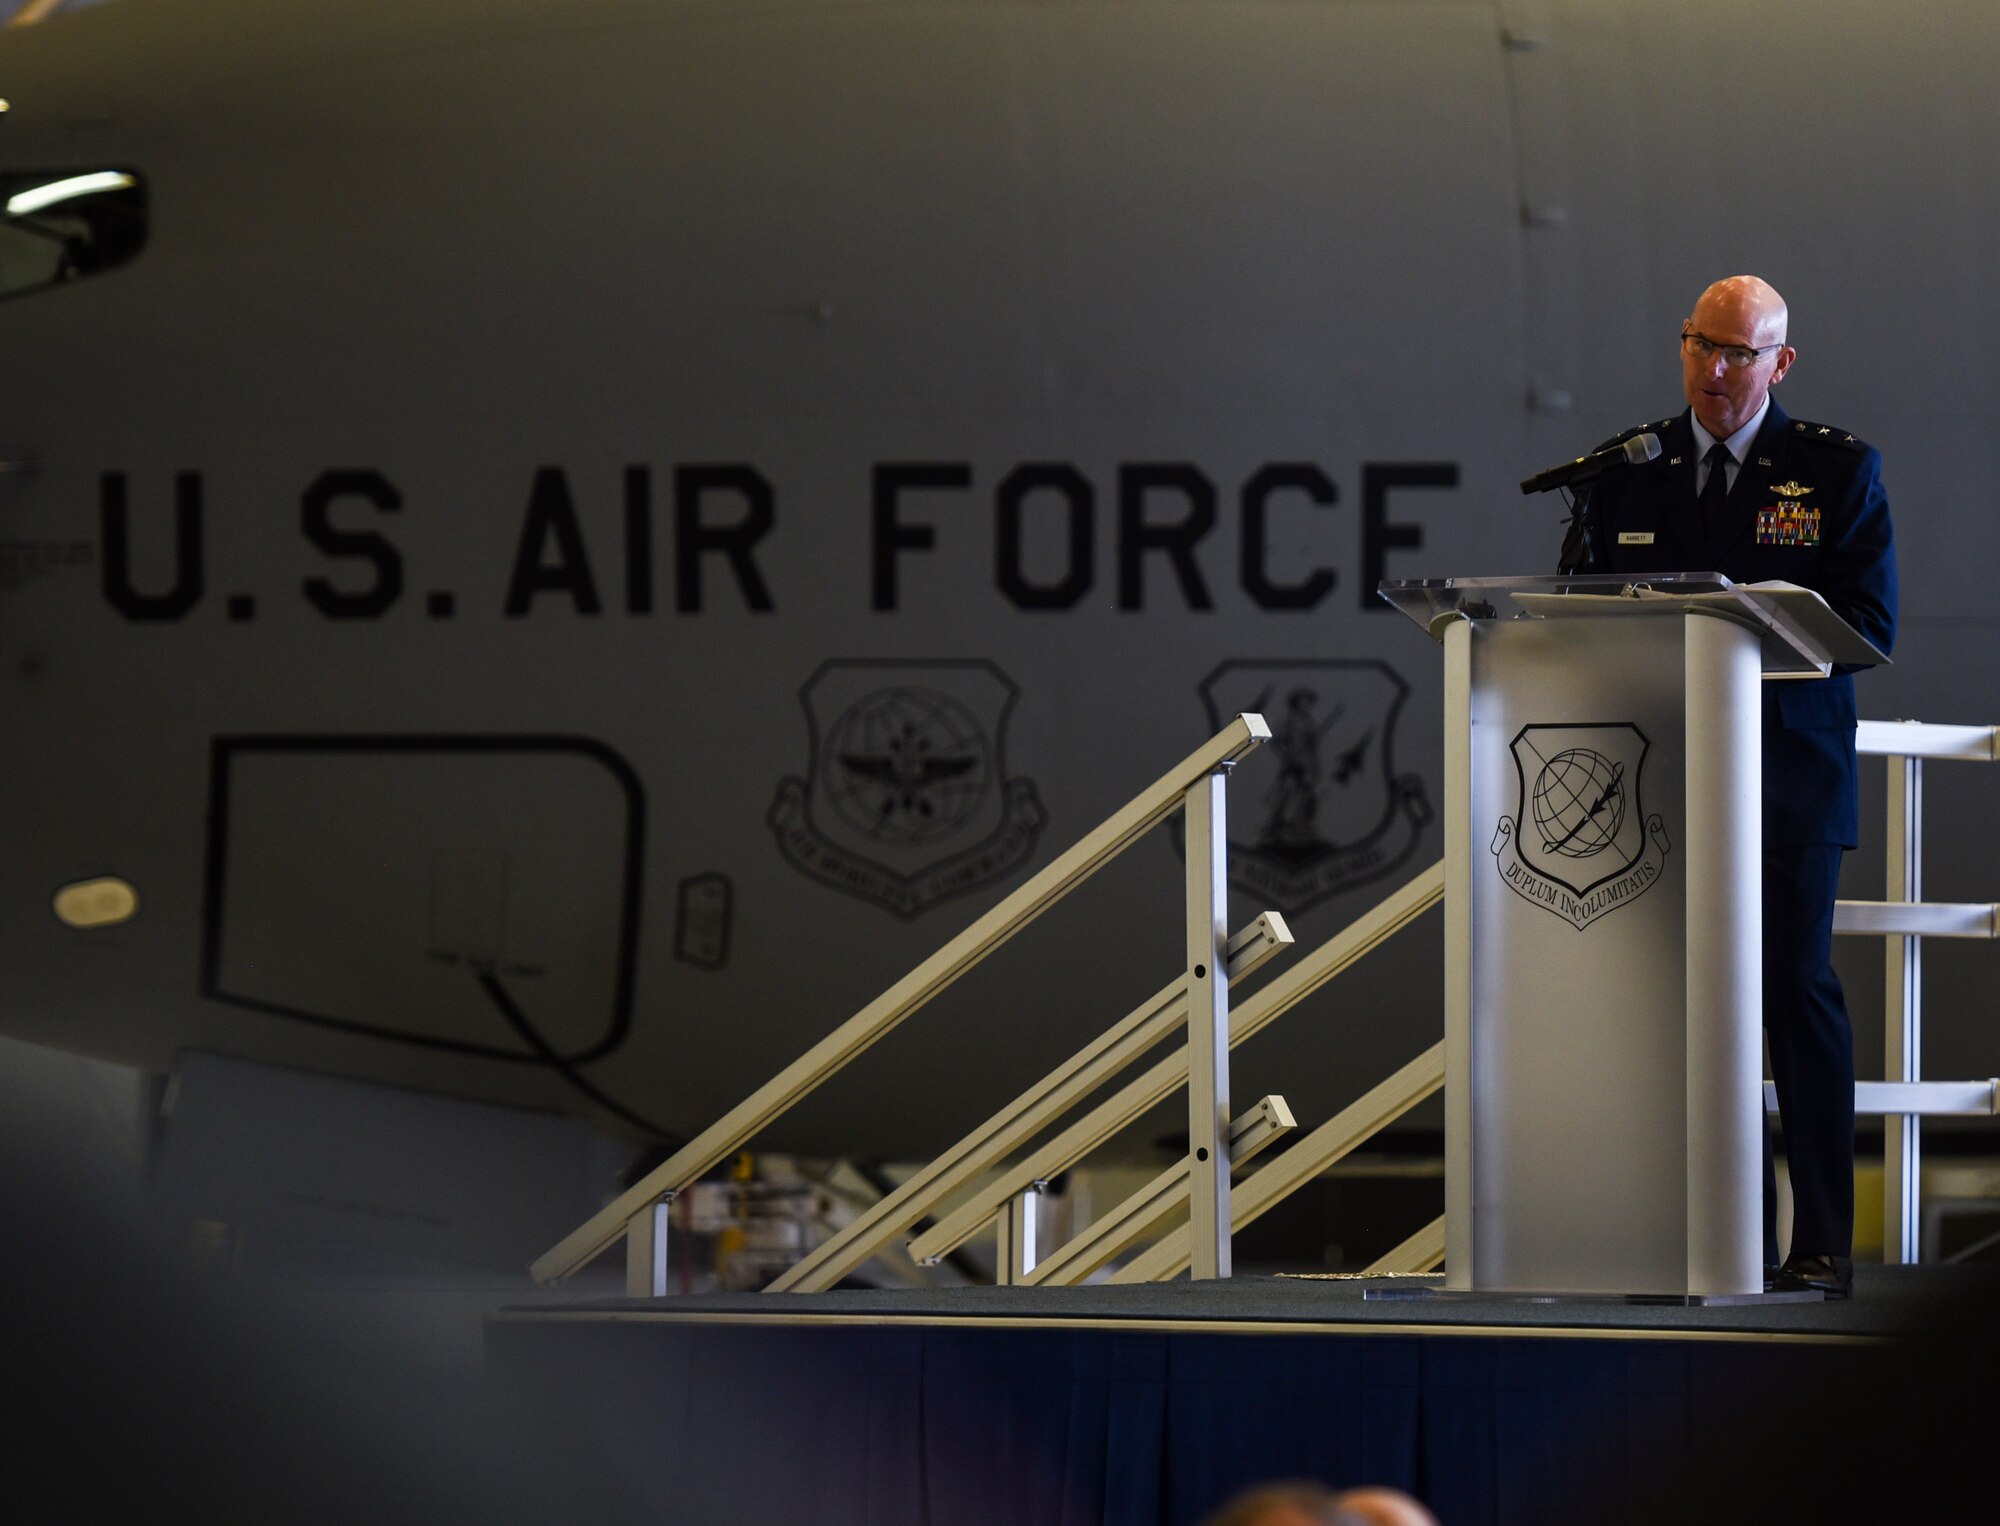 U.S. Air Force Maj. Gen. Sam Barrett, 18th Air Force commander, gives a speech during the 97th Air Refueling Squadron’s reactivation ceremony and Assumption of Command at Fairchild Air Force Base, Washington Oct. 18, 2019.